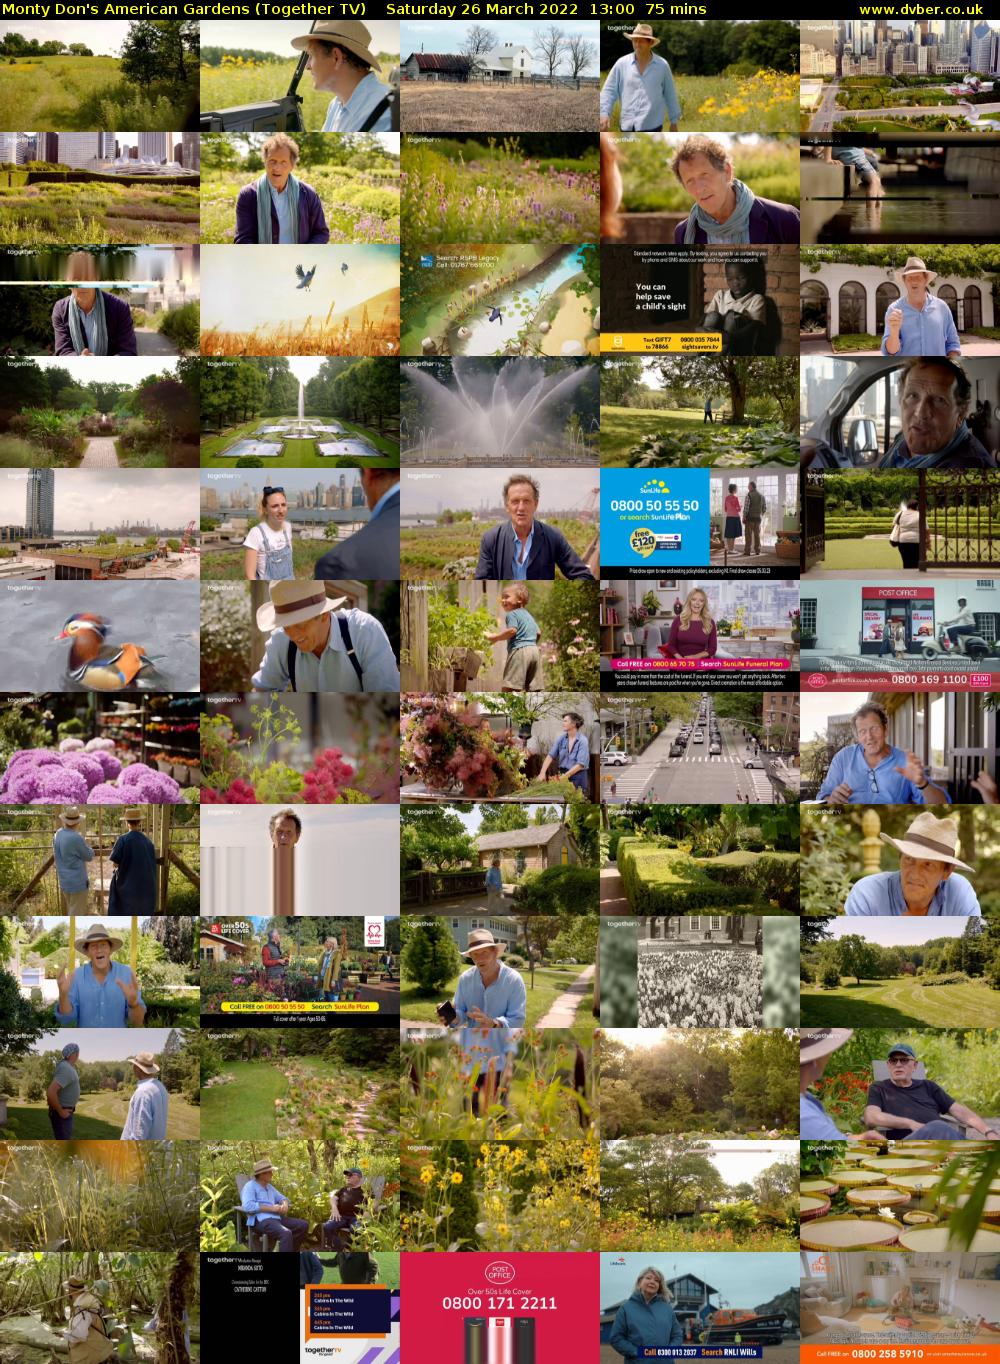 Monty Don's American Gardens (Together TV) Saturday 26 March 2022 13:00 - 14:15